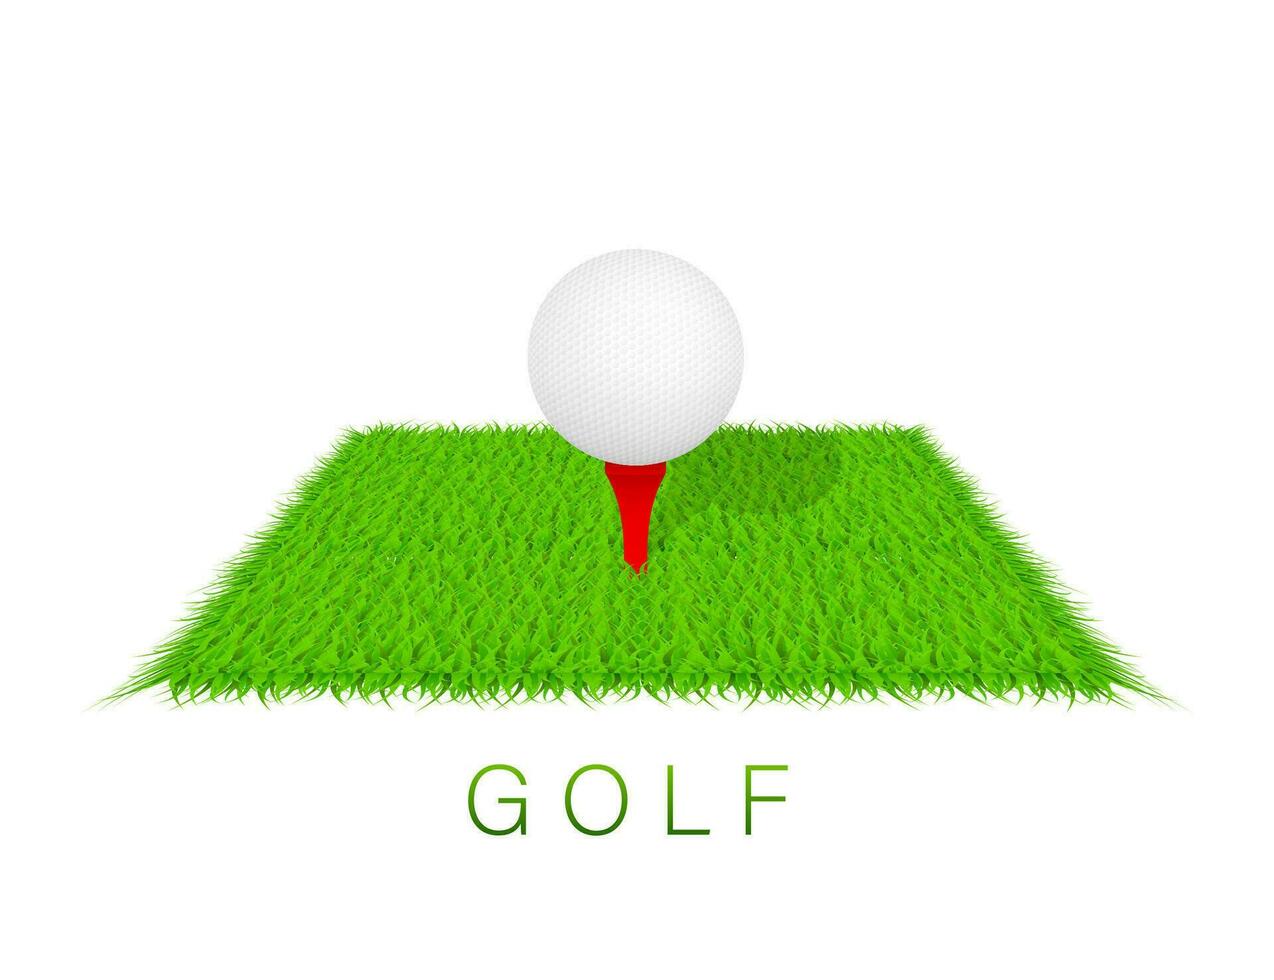 Golf background. Golf course. Vector stock illustration